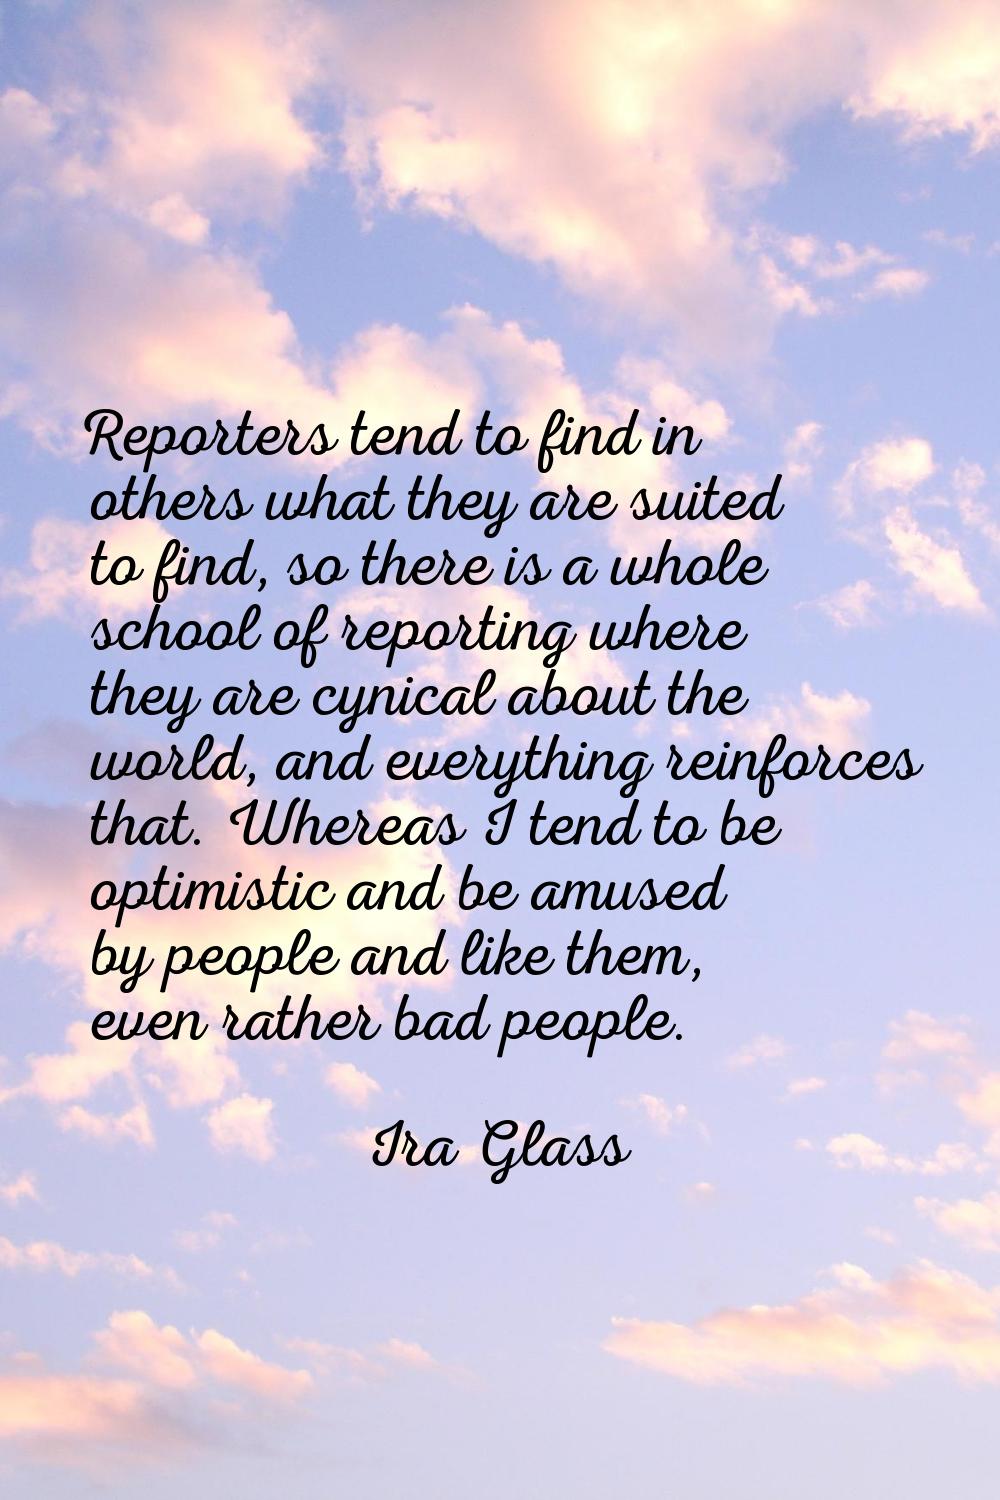 Reporters tend to find in others what they are suited to find, so there is a whole school of report